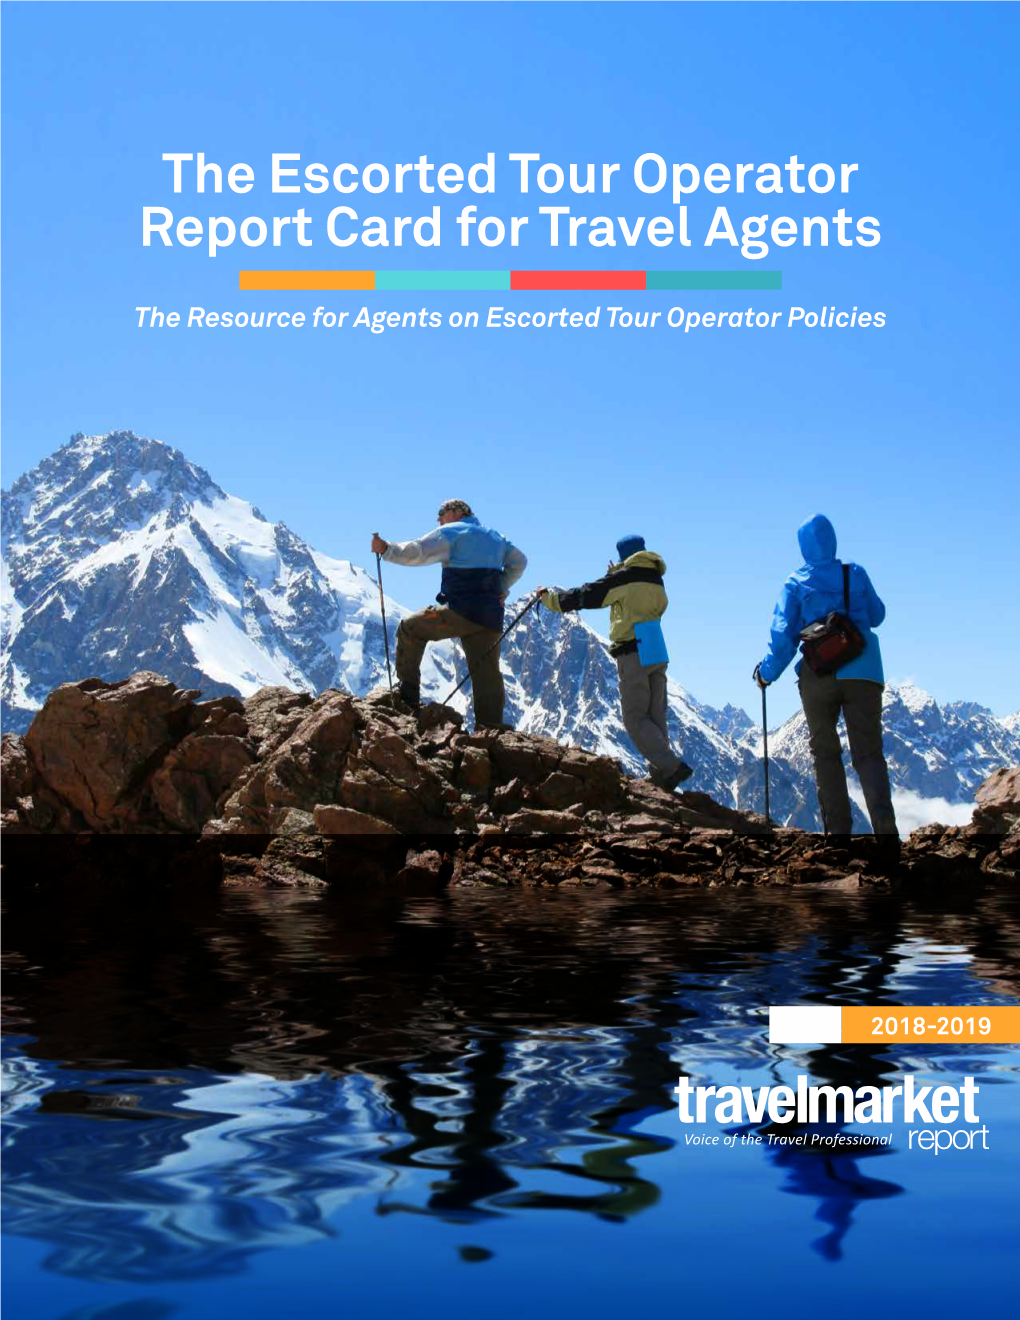 The Escorted Tour Operator Report Card for Travel Agents